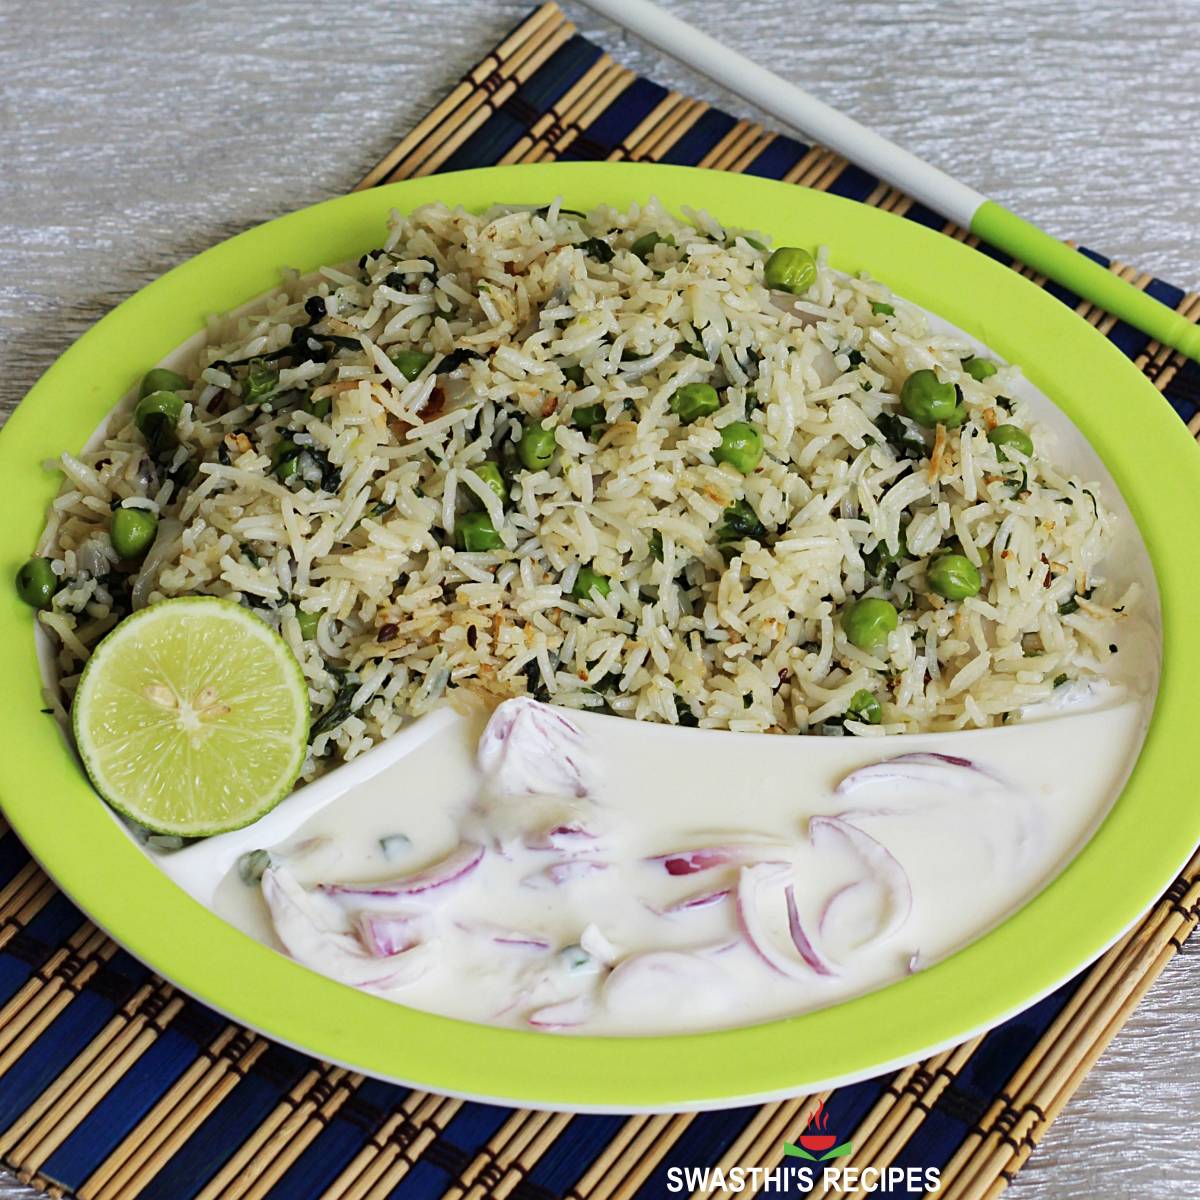 Methi pulao recipe made with rice, spices and methi leaves